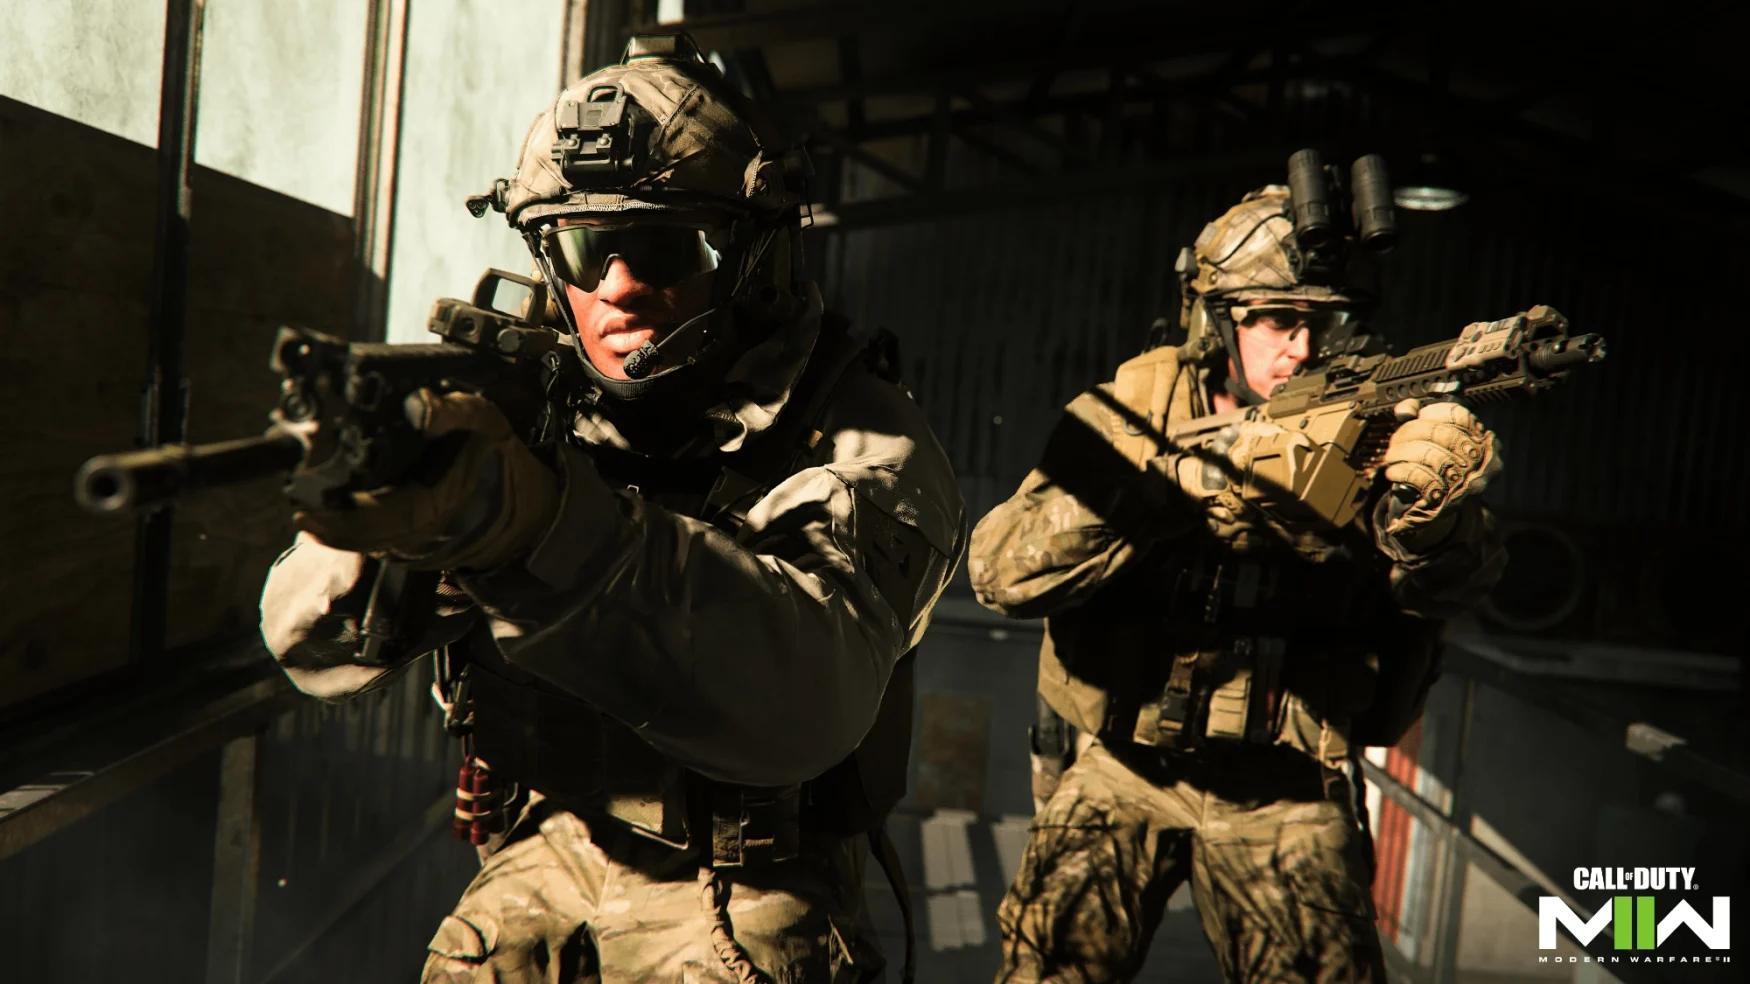 Screenshot from Call of Duty: Modern Warfare, showing two soldiers aiming their combat rifles to the left and right of the camera